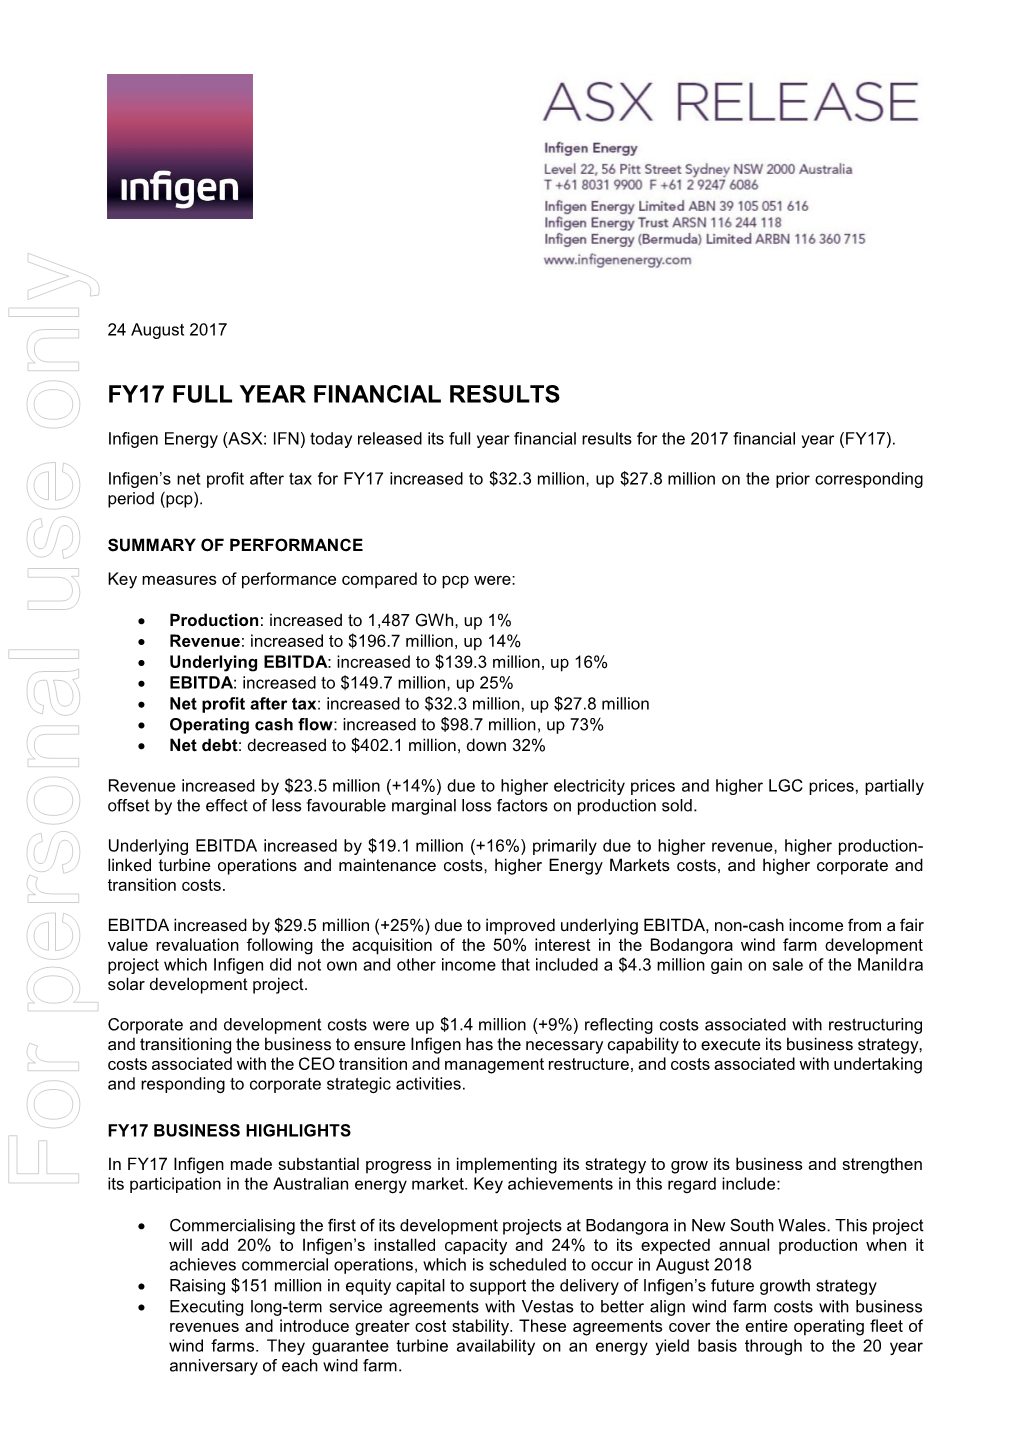 FY17 Financial Results